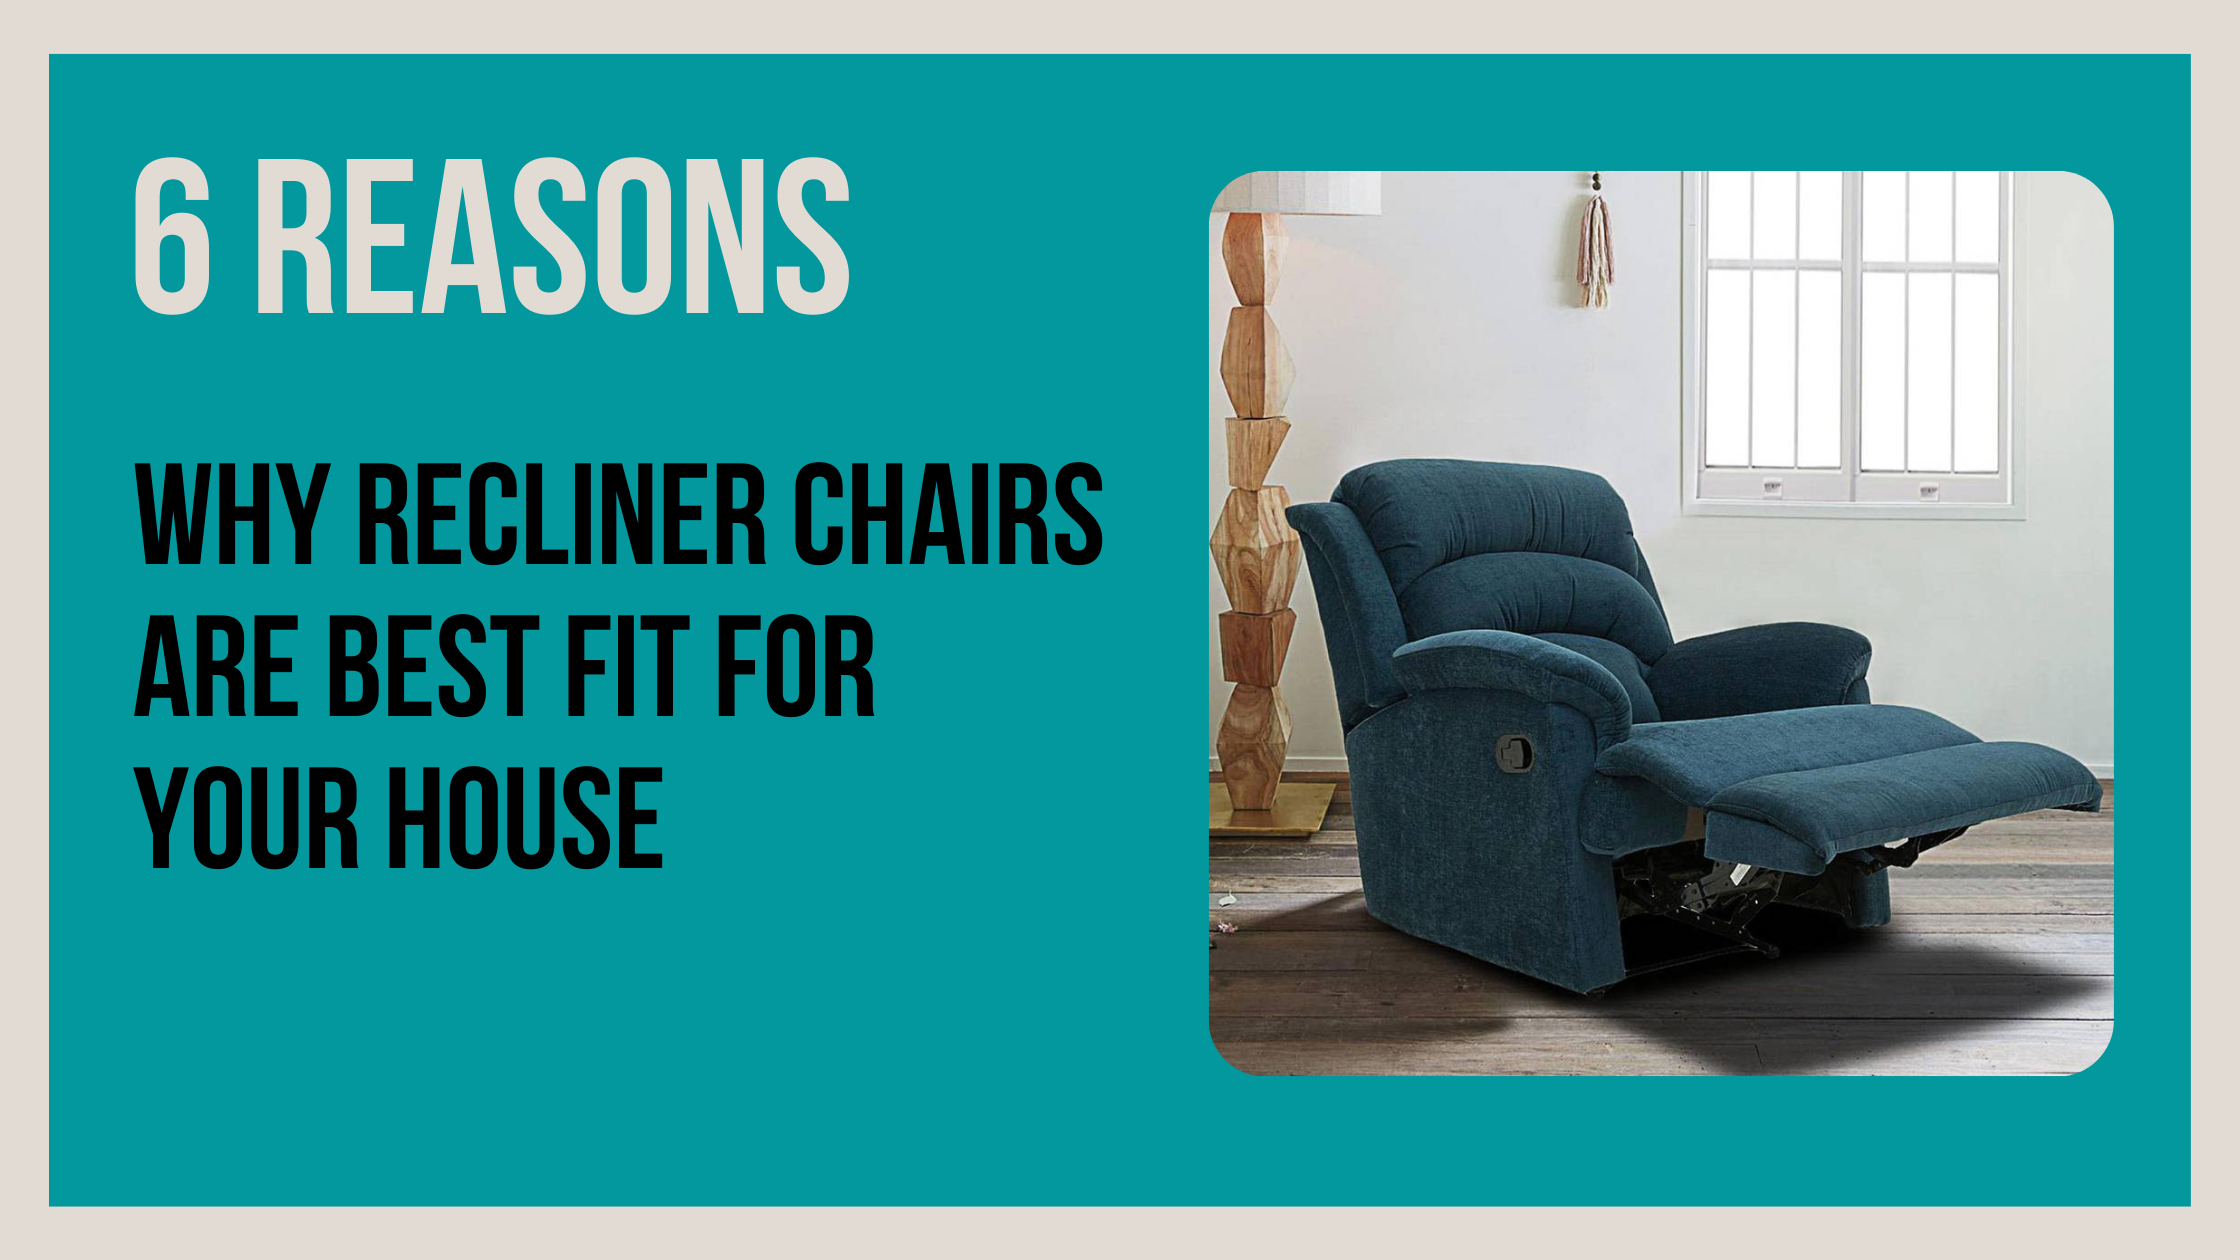 Why Recliner Chairs Are Best Fit For Your House